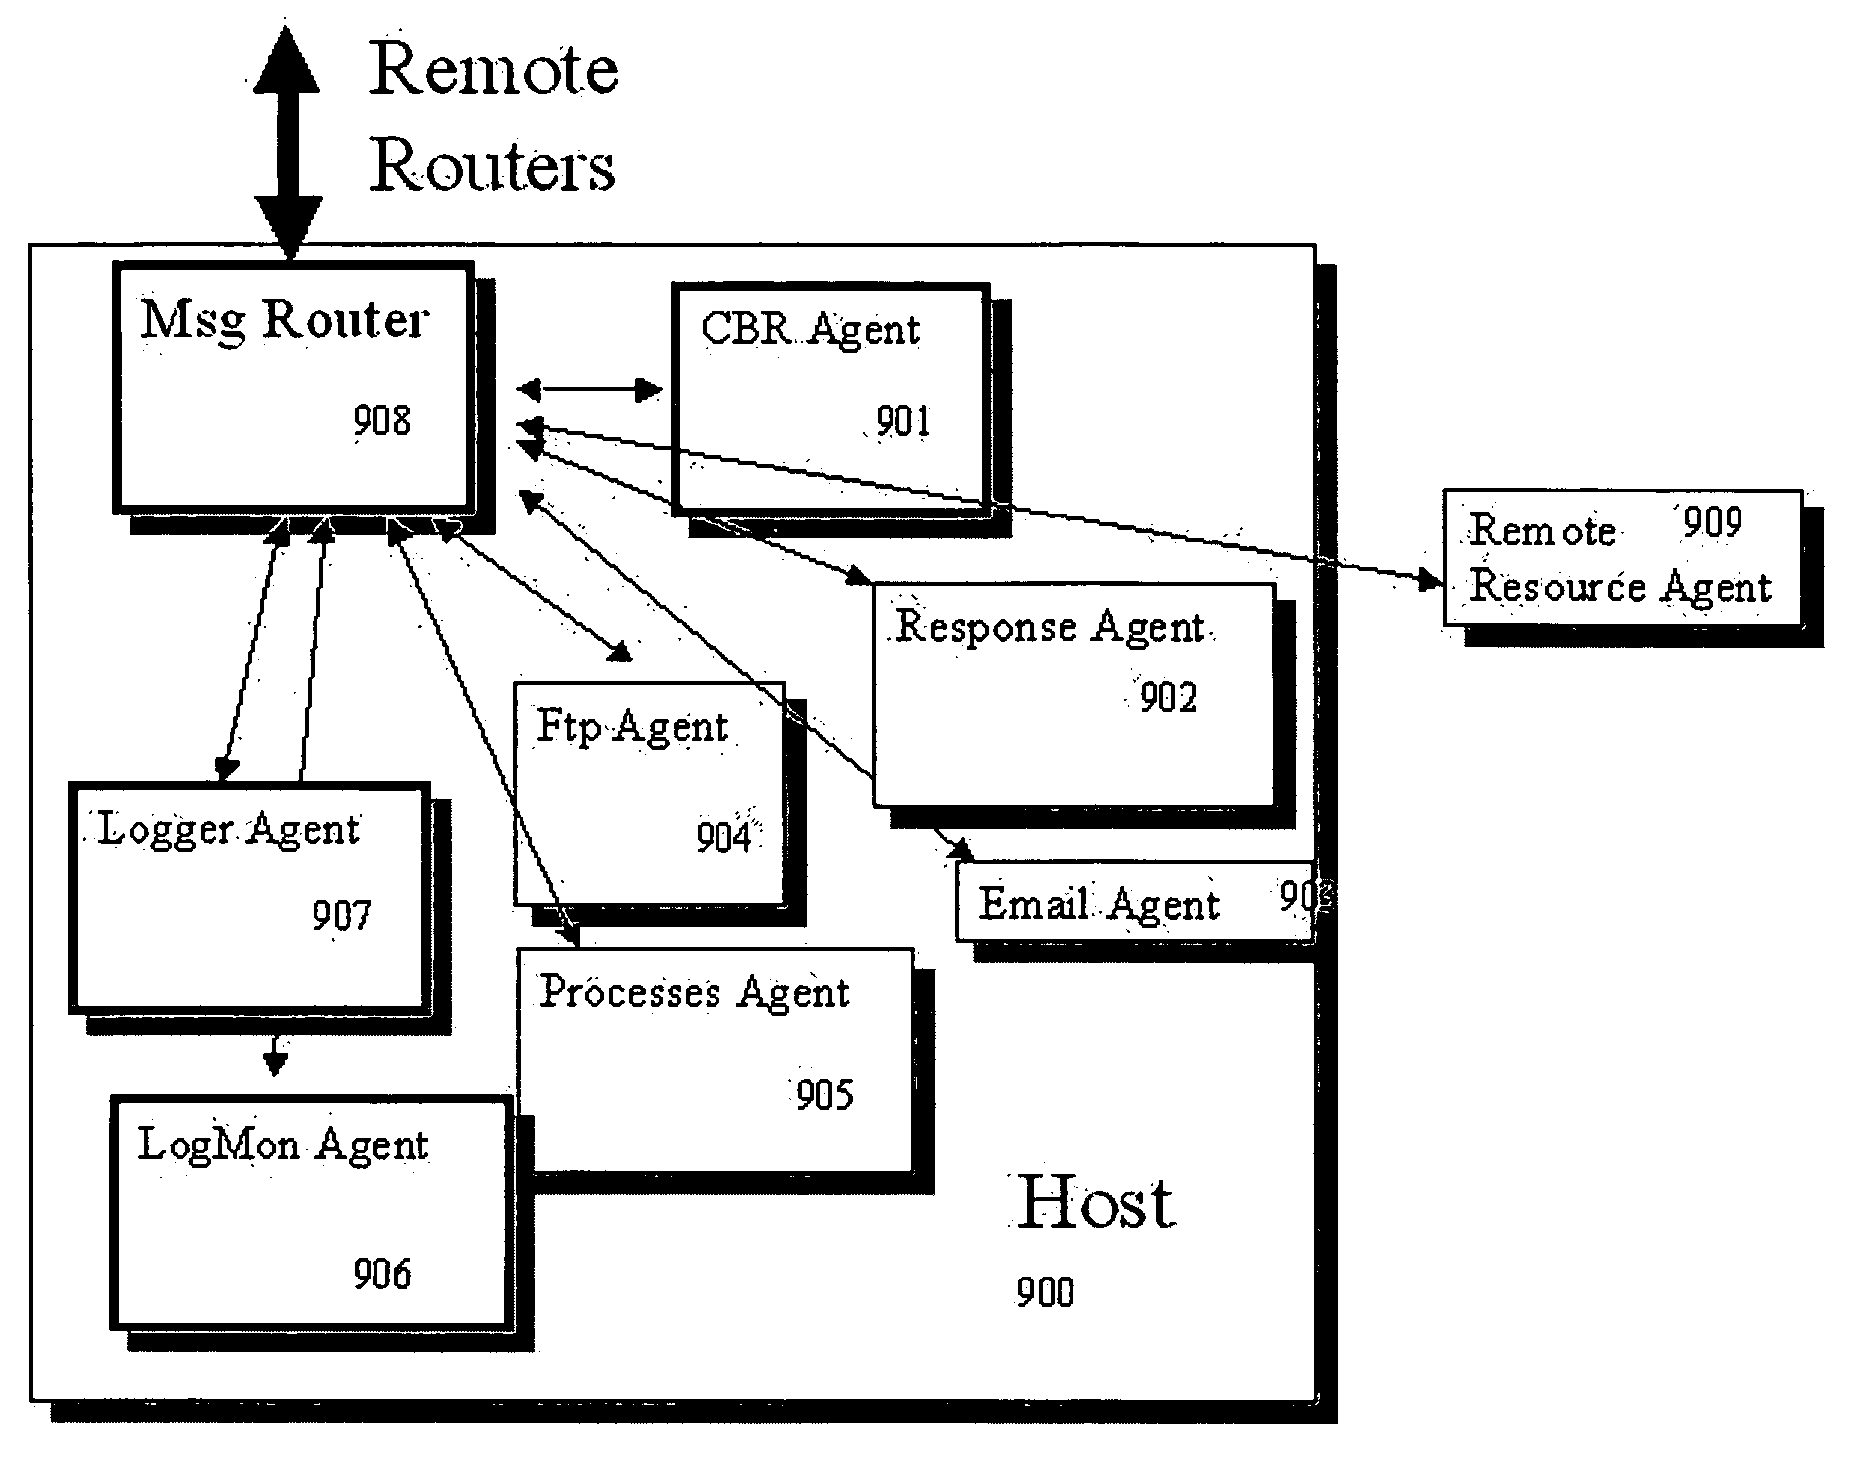 System and method for using agent-based distributed reasoning to manage a computer network